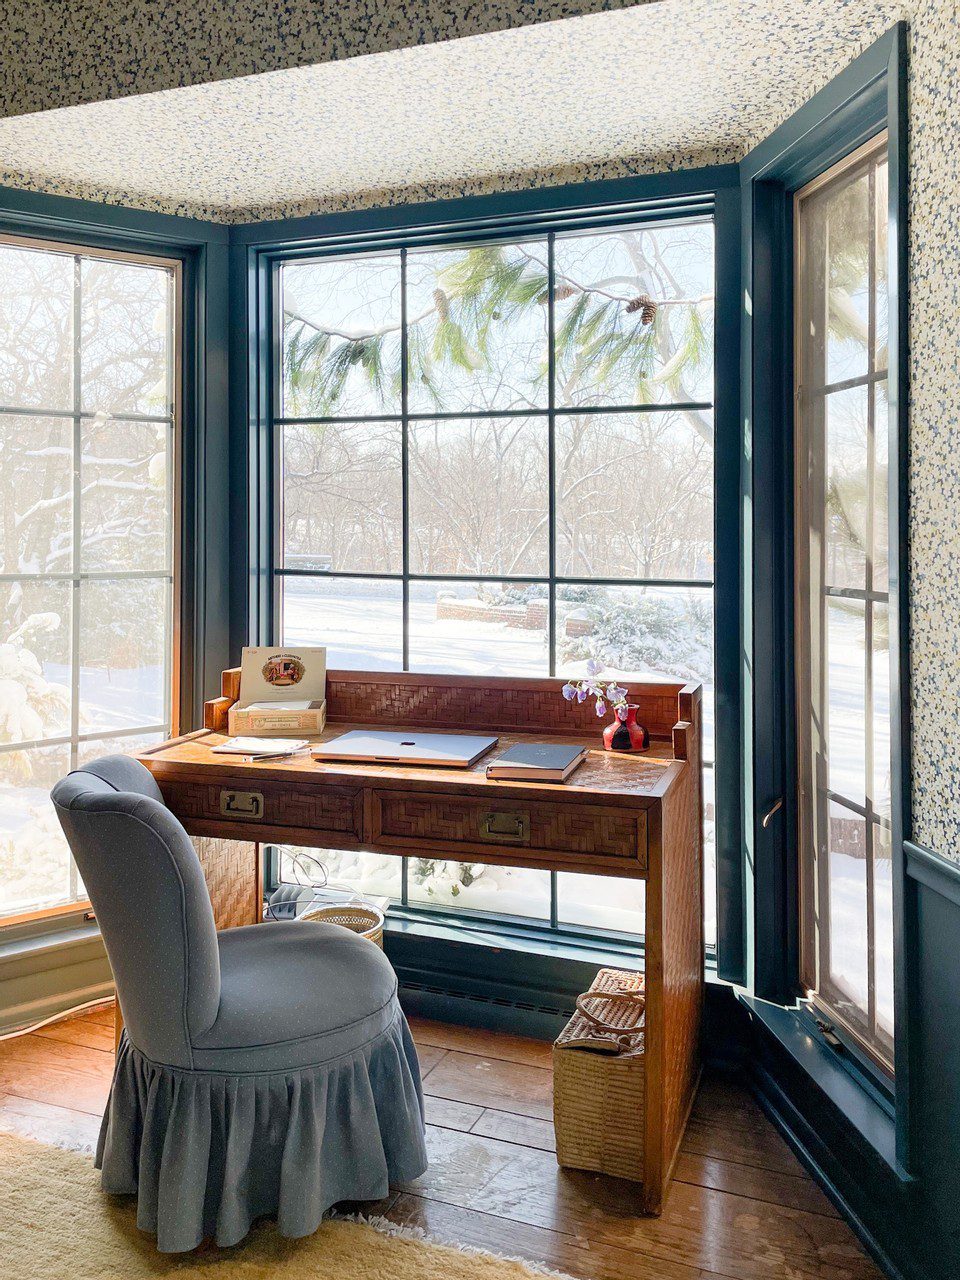 Antique wooden desk and blue ruffled chair in front of bay window in blue office.